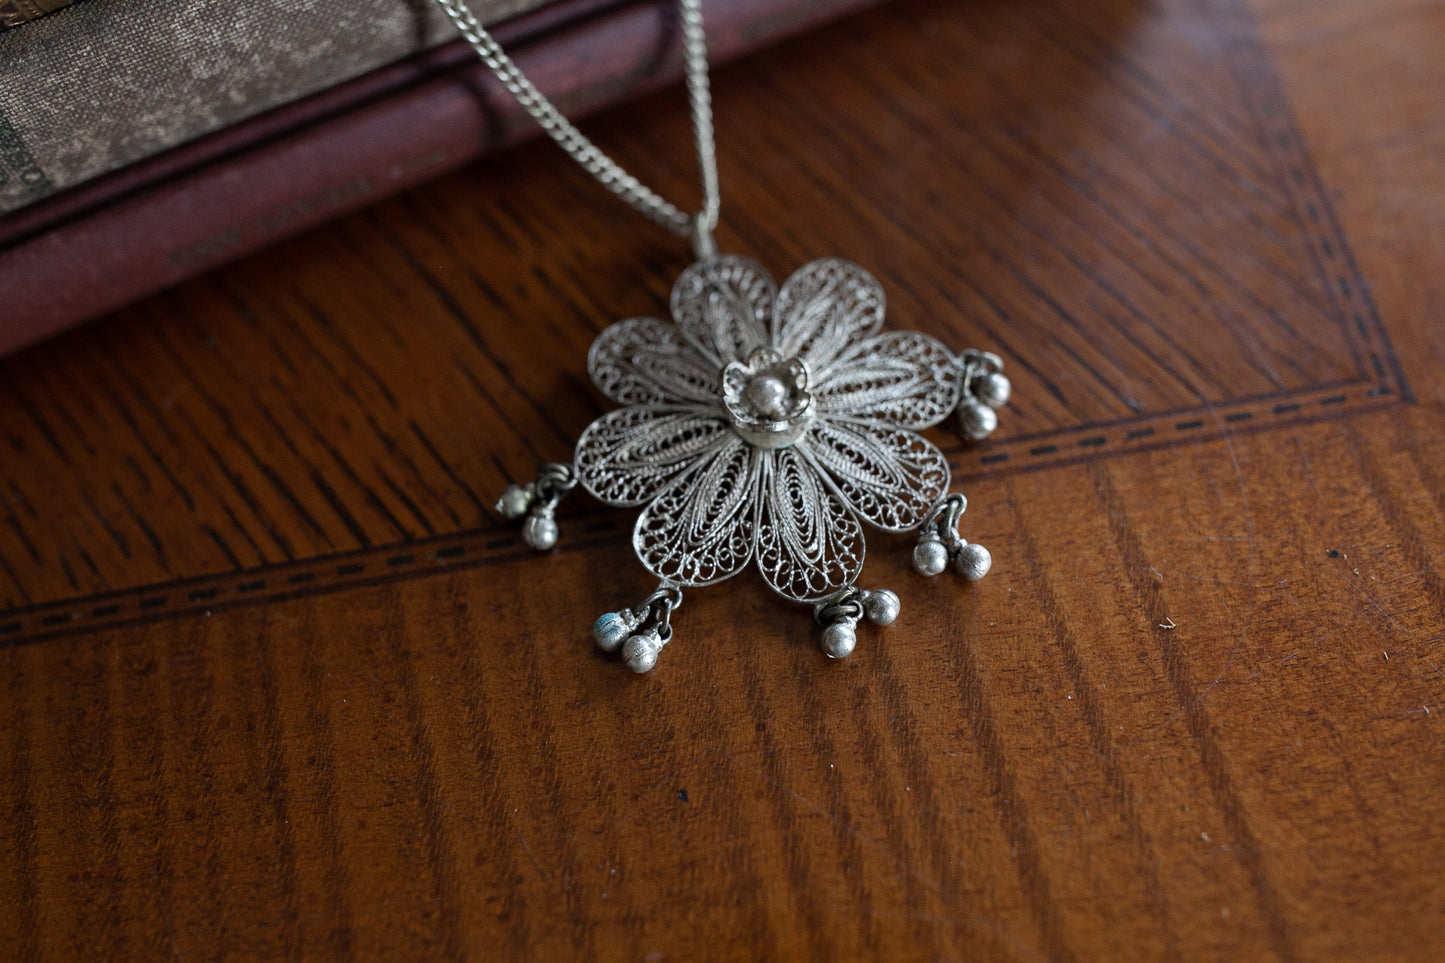 Vintage Necklace - Costume Jewelry -Flower Necklace Silver- Filigree Necklace